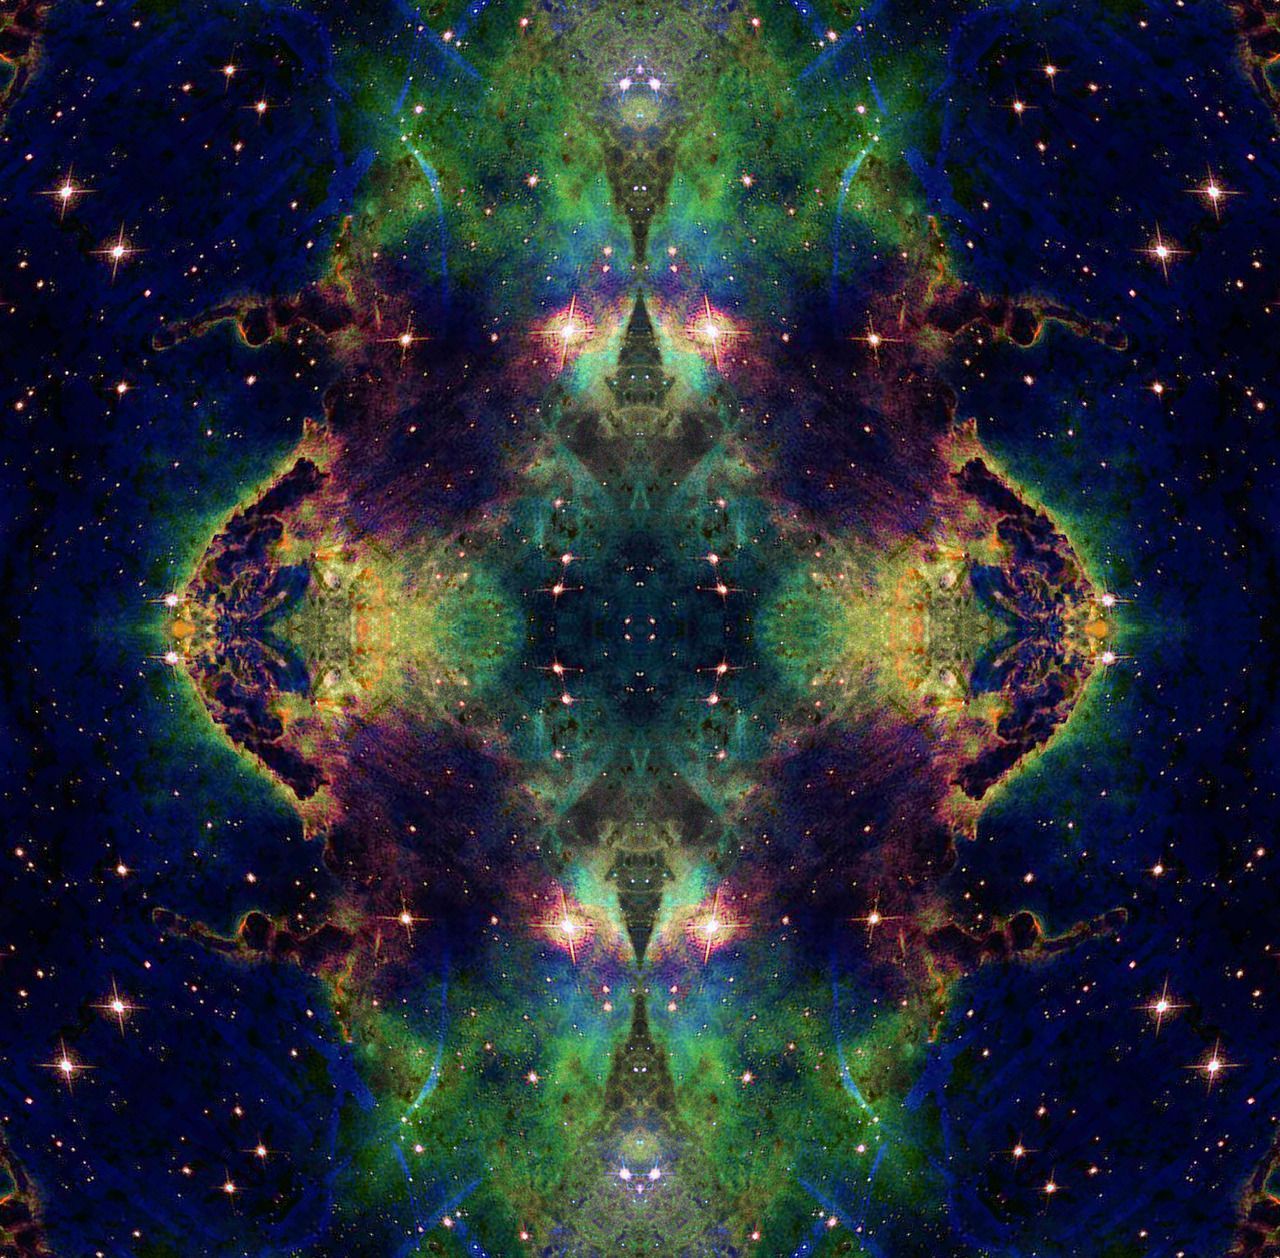 Trippy Space Wallpaper Group Wallpaper House.com